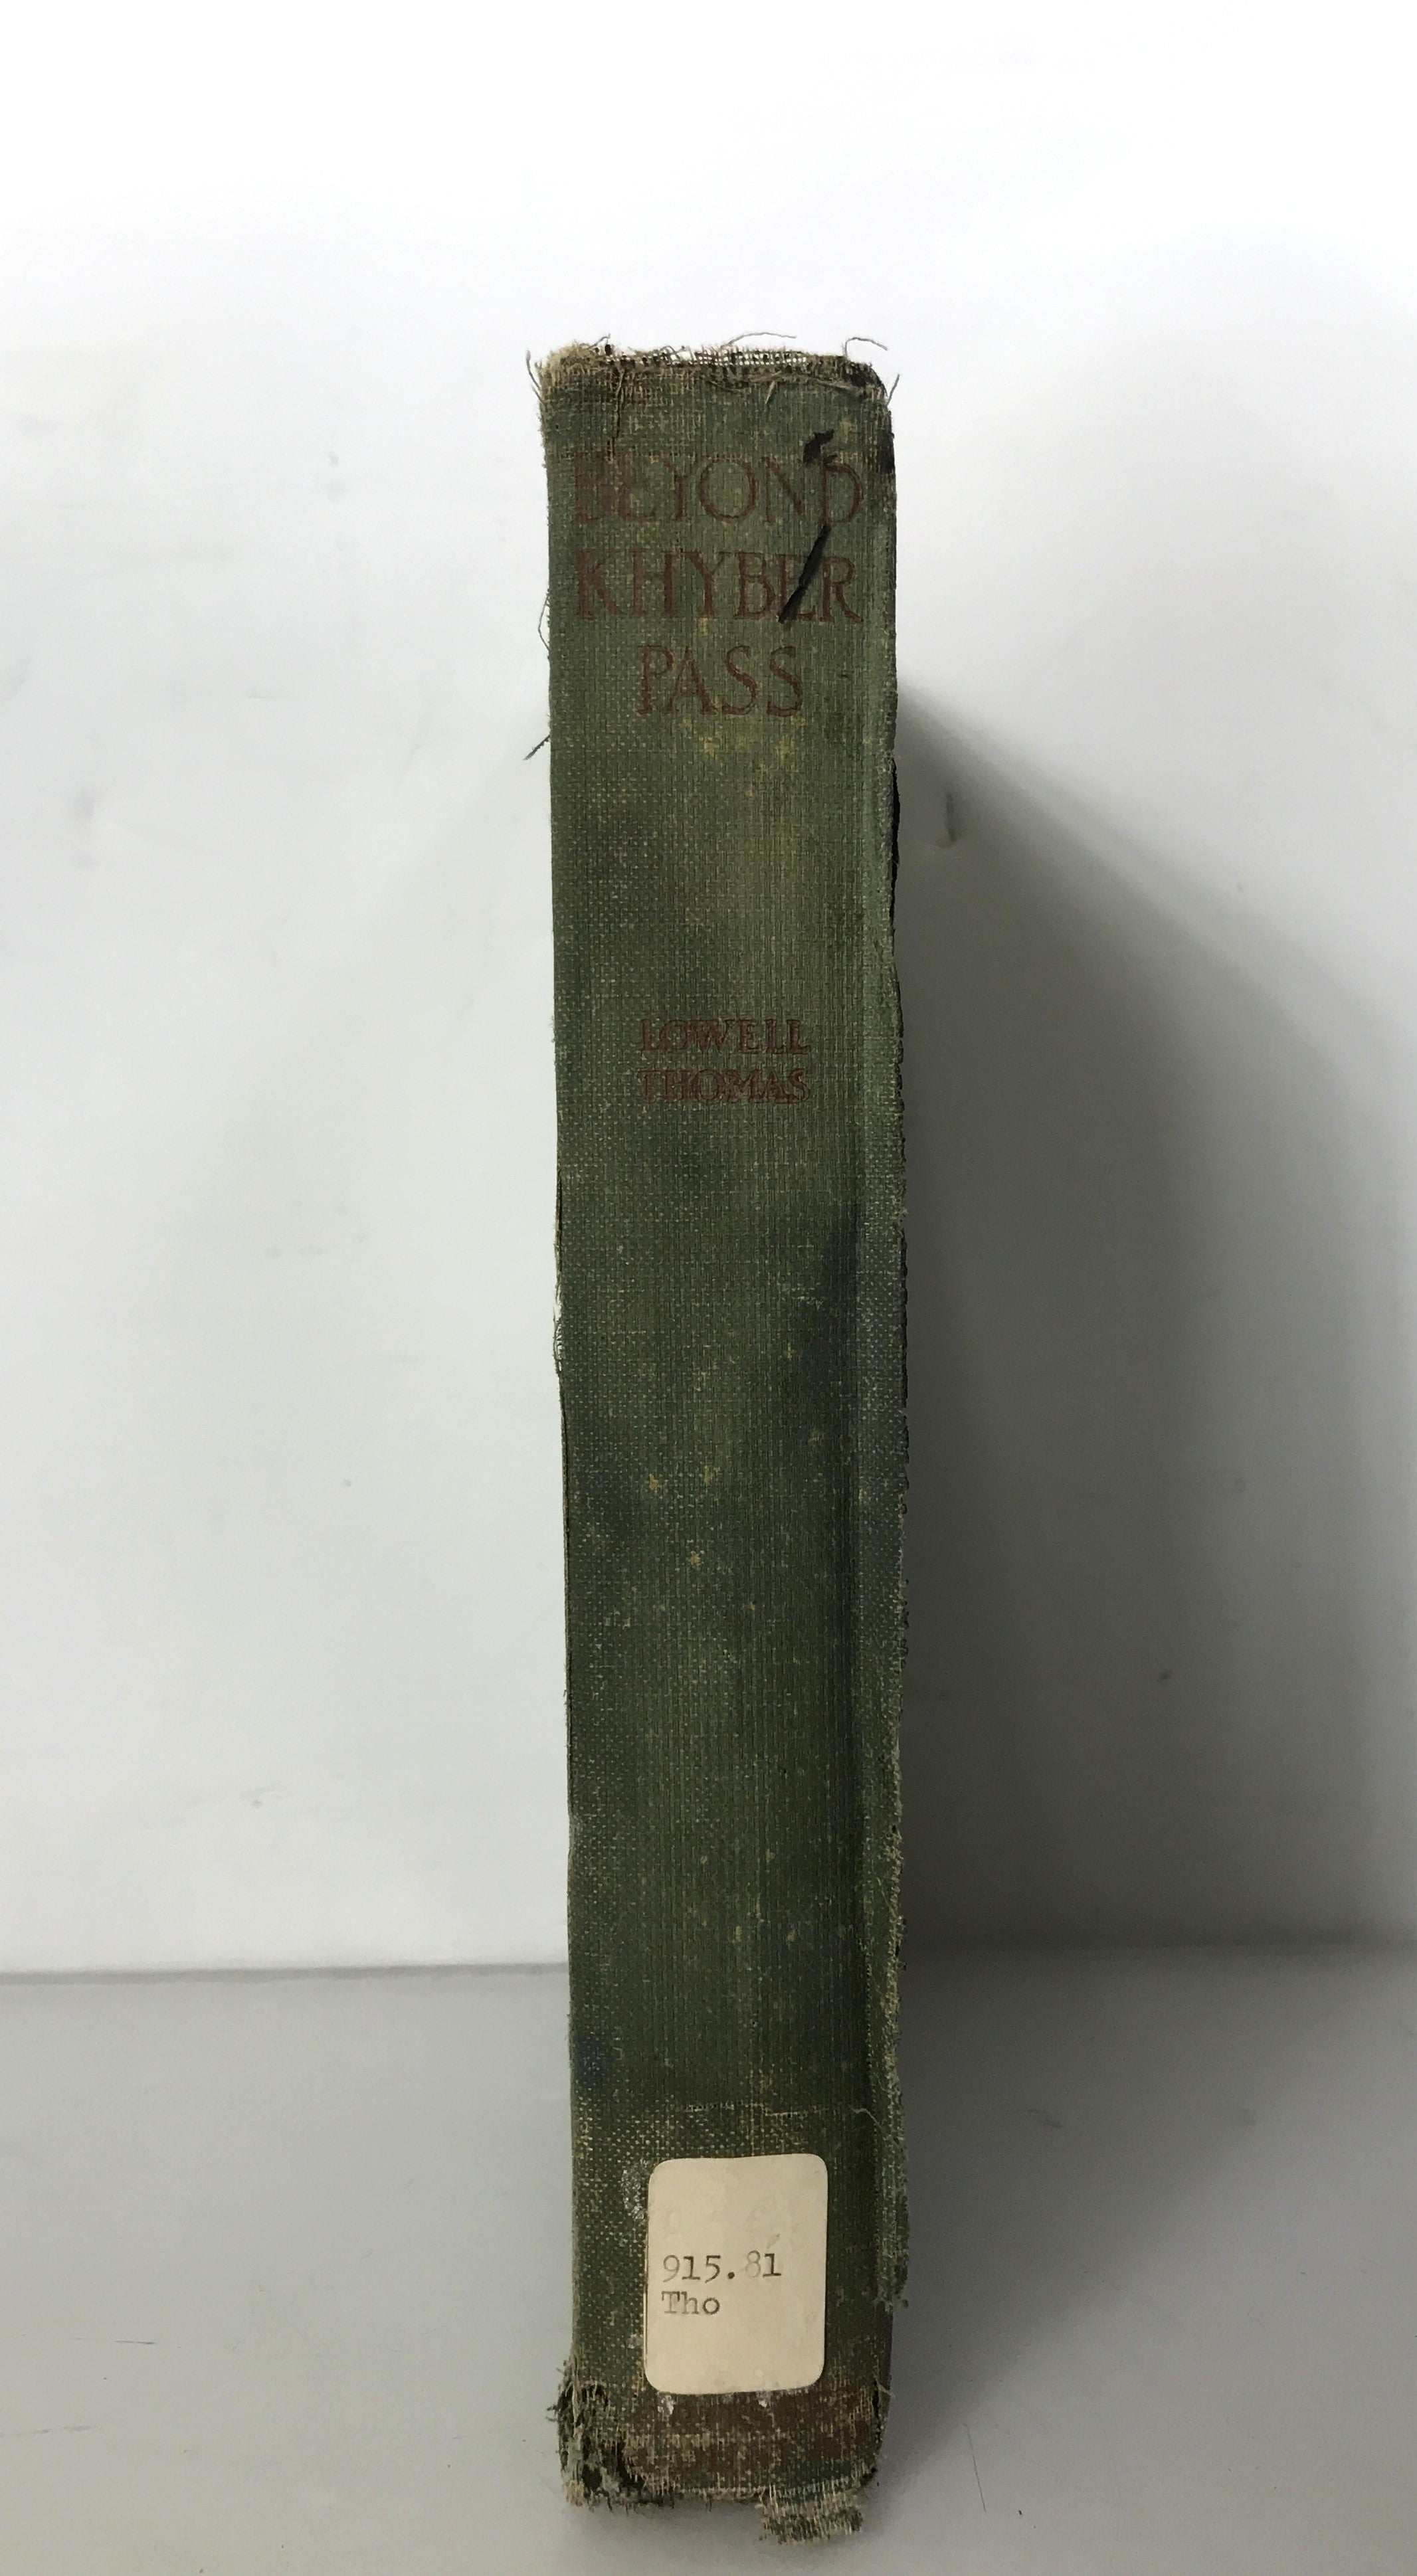 Beyond Khyber Pass into Forbidden Afghanistan by Lowell Thomas 1925 HC